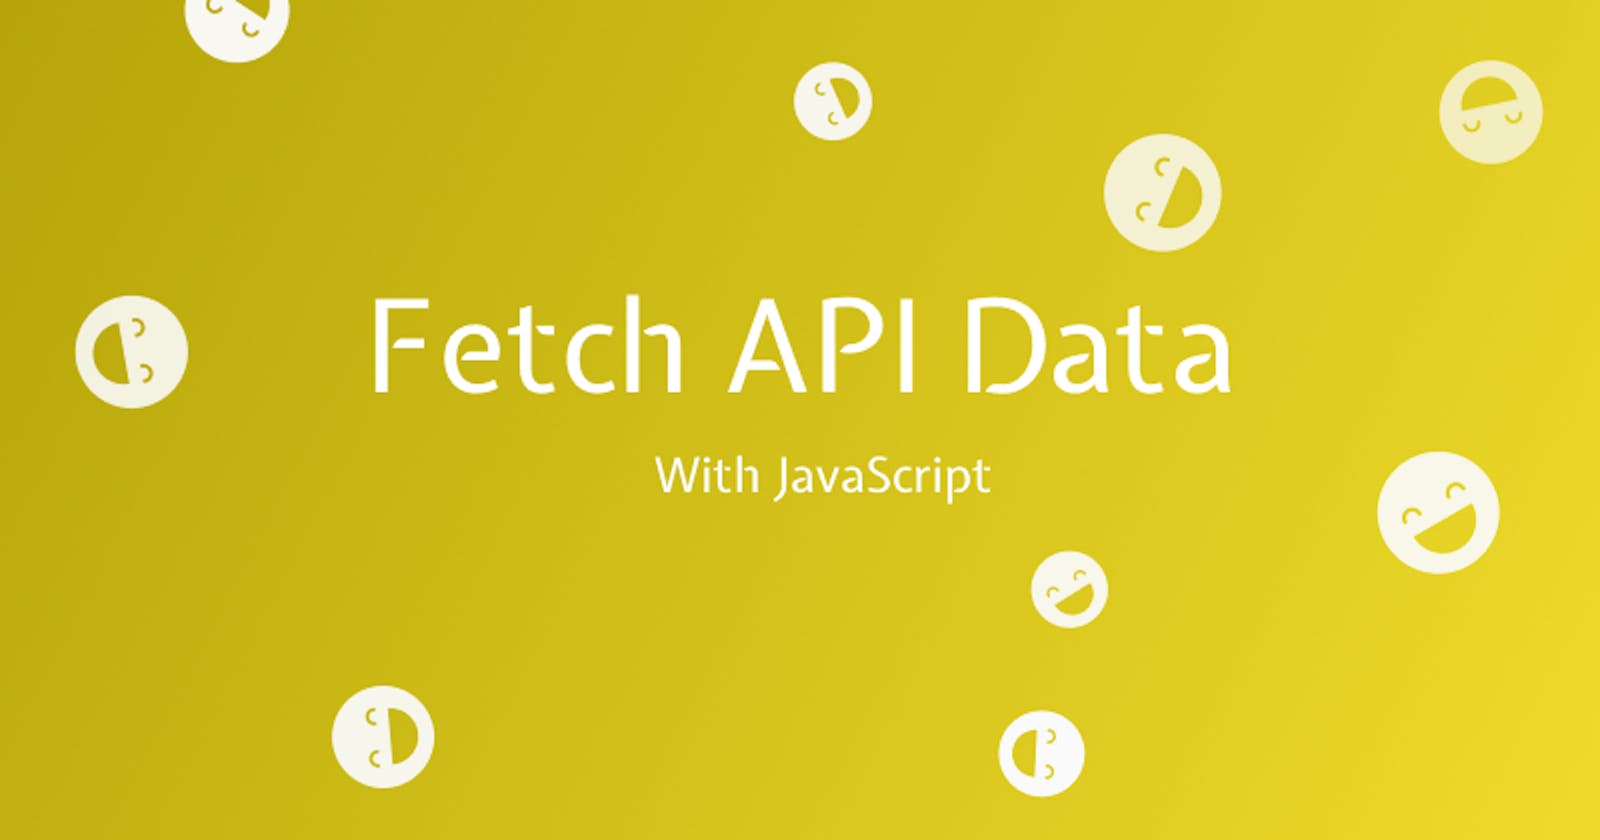 Fetch Data from an API with JavaScript